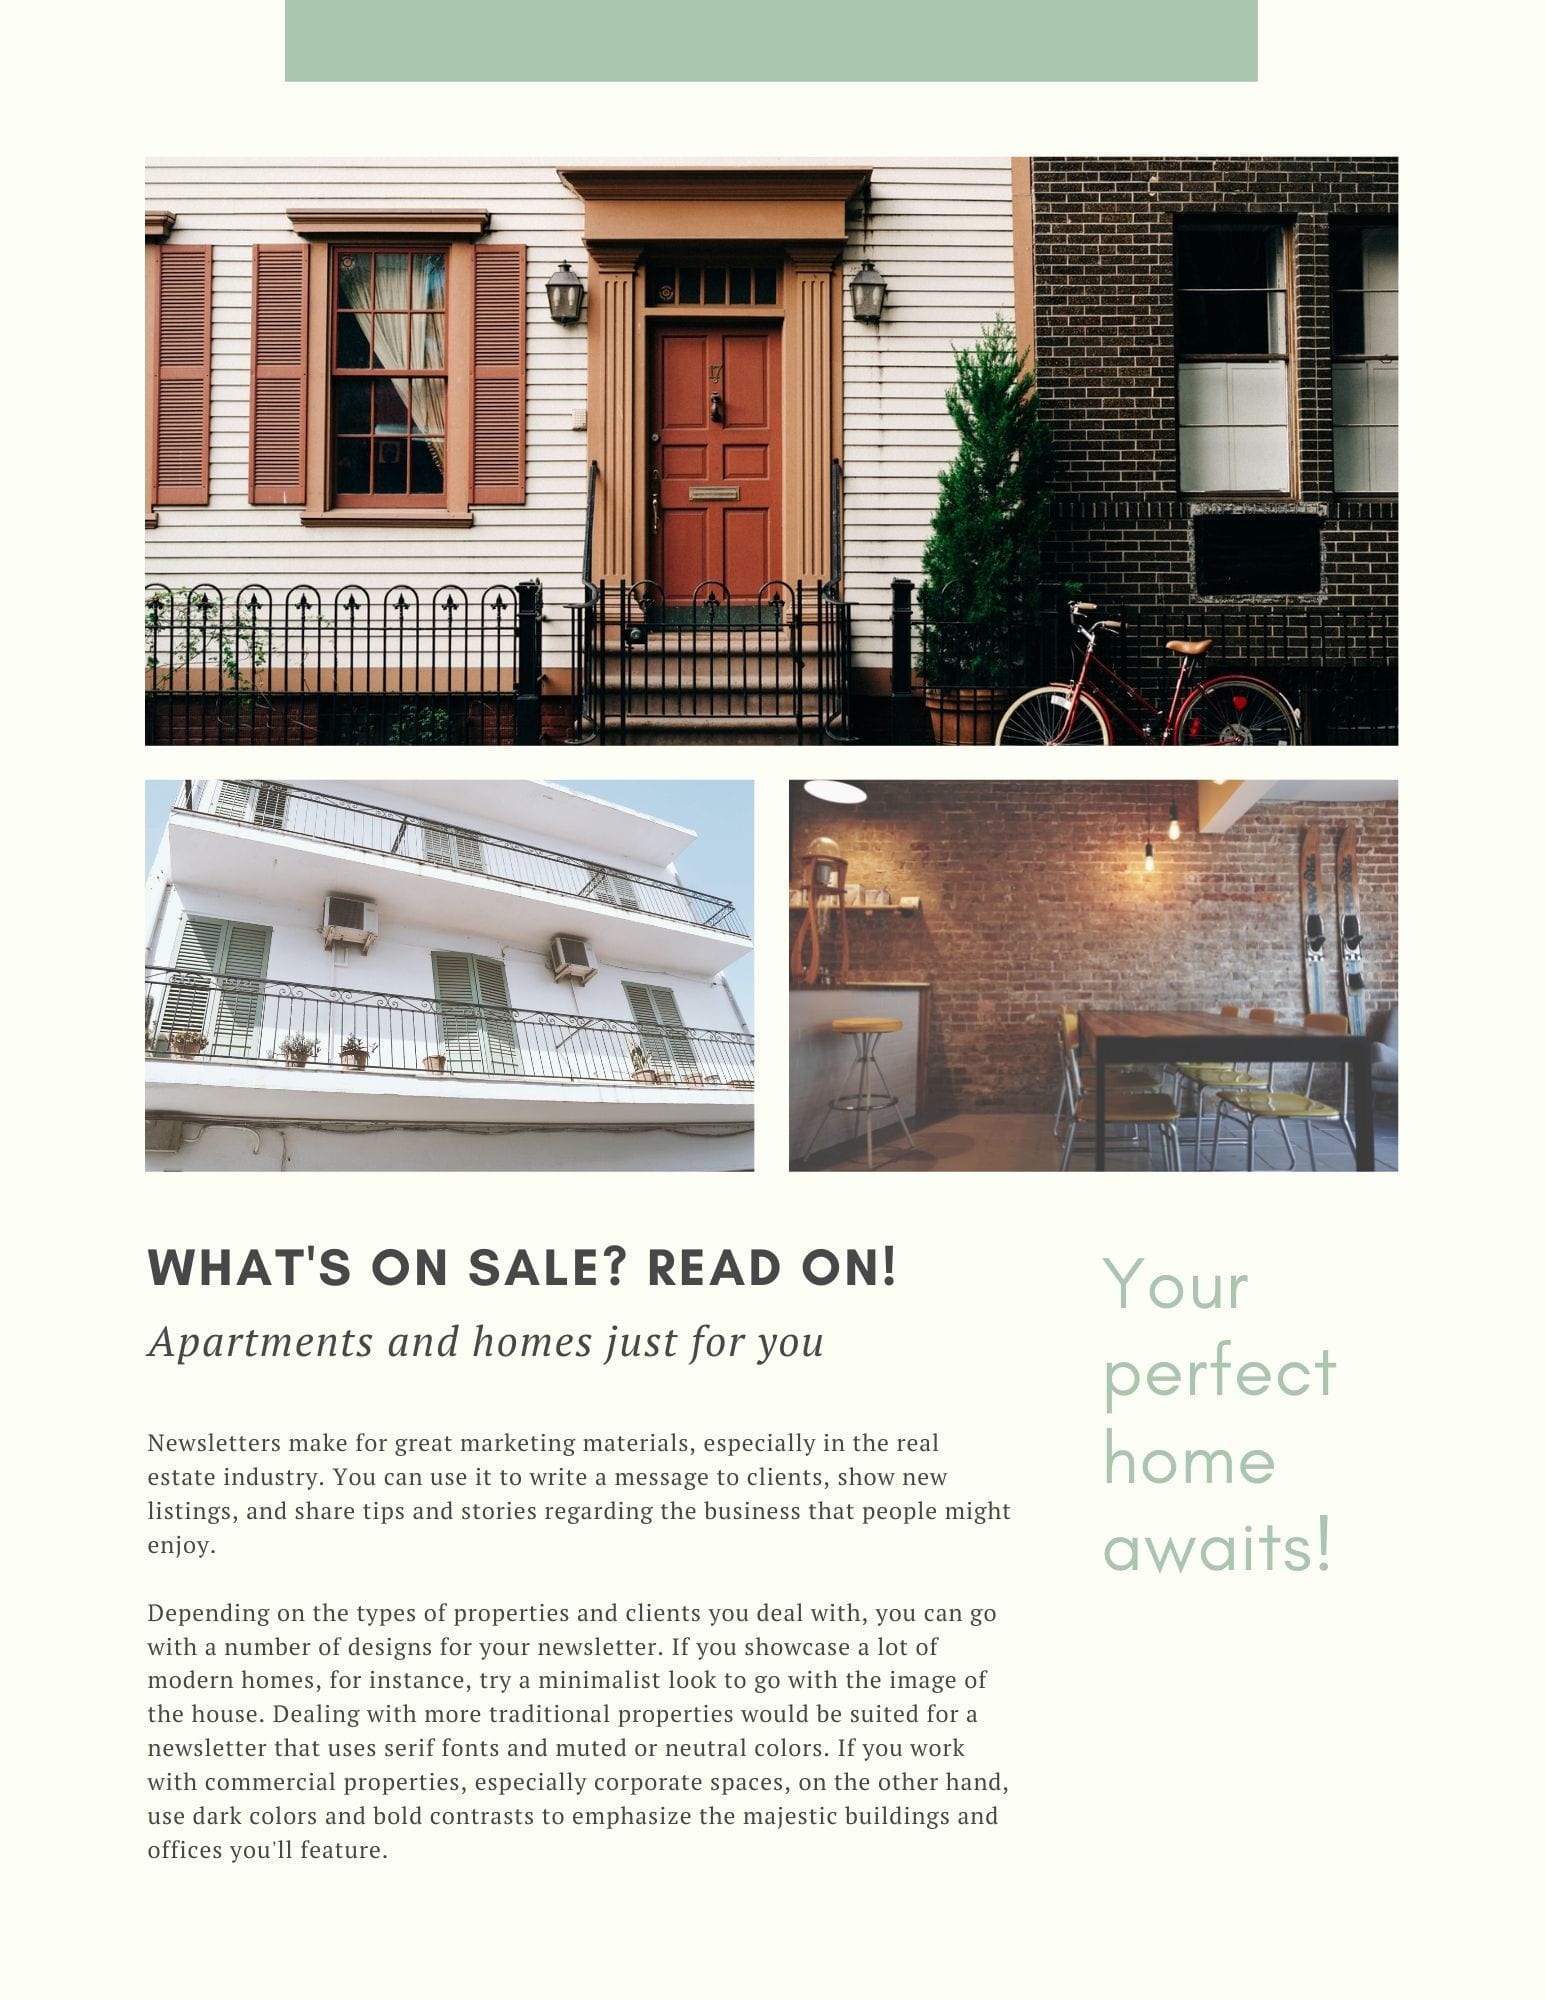 Canva has a library of real estate newsletter templates that can be edited and printed directly from Canva. Choose whether you want to print them one or two-sided, standard or premium paper, and the number of copies. 